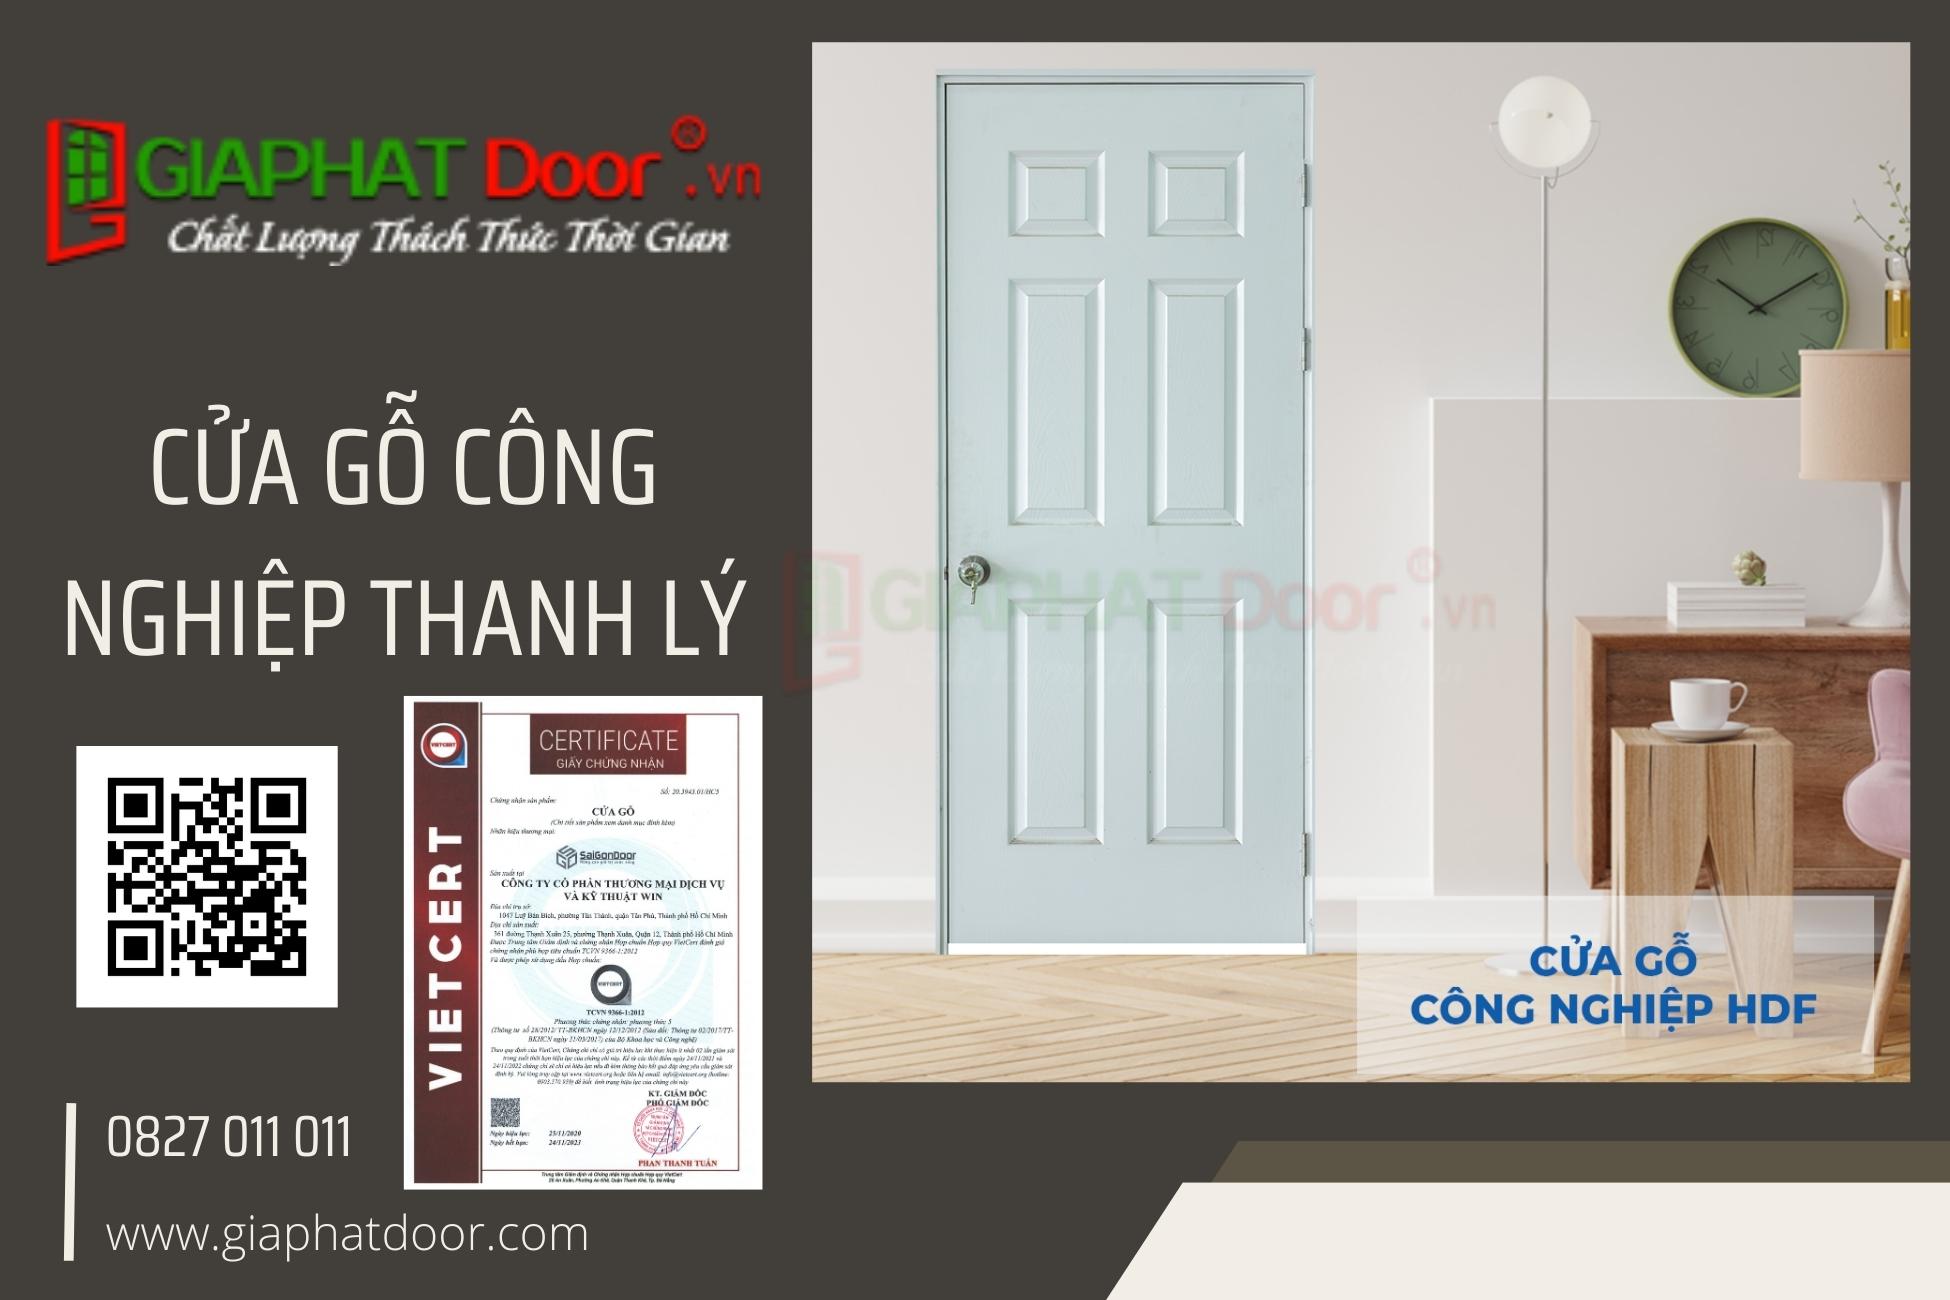 cua-go-cong-nghiep-thanh-ly9